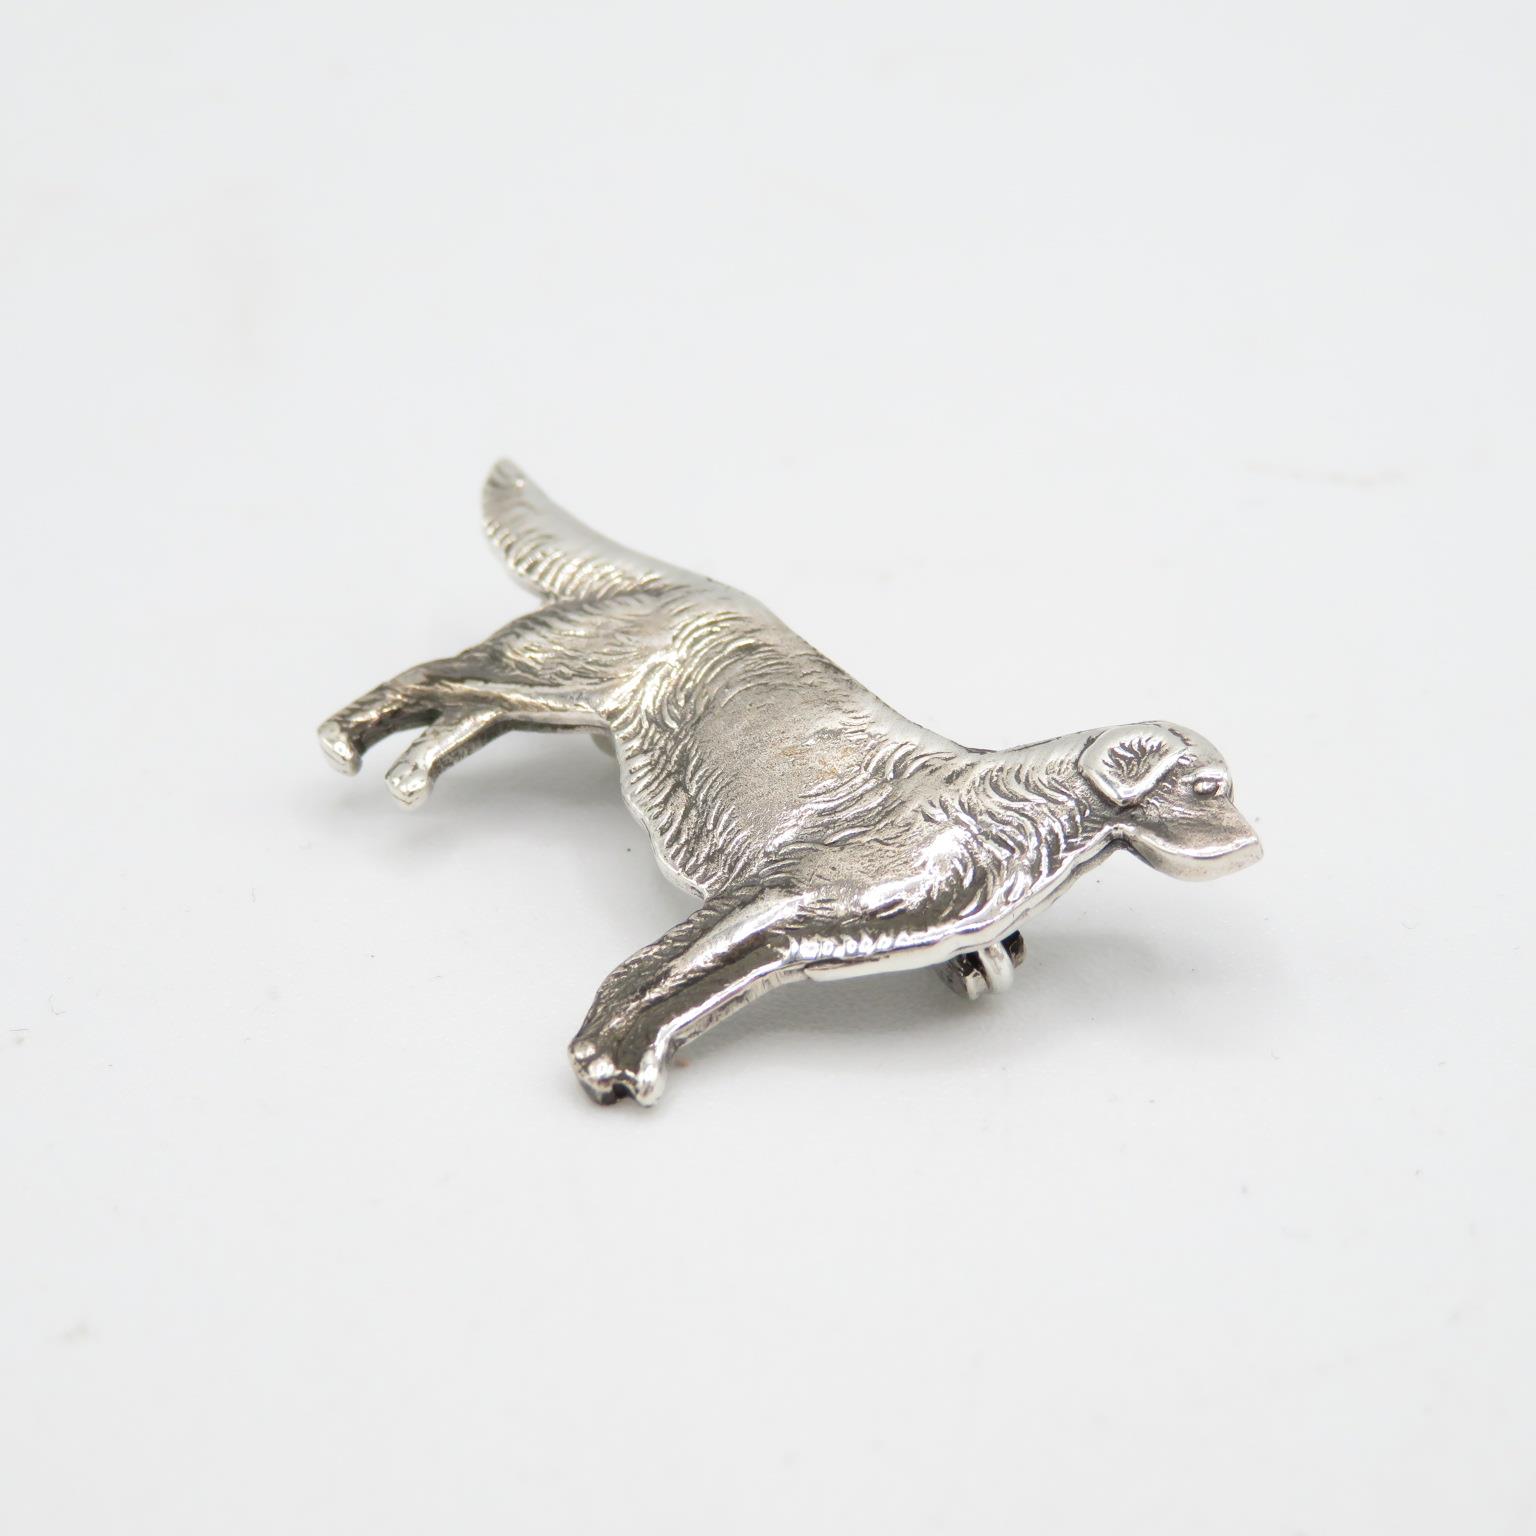 HM 925 Sterling Silver Labrador Retriever badge in excellent condition with great detail (4.4g) 40mm - Image 2 of 3